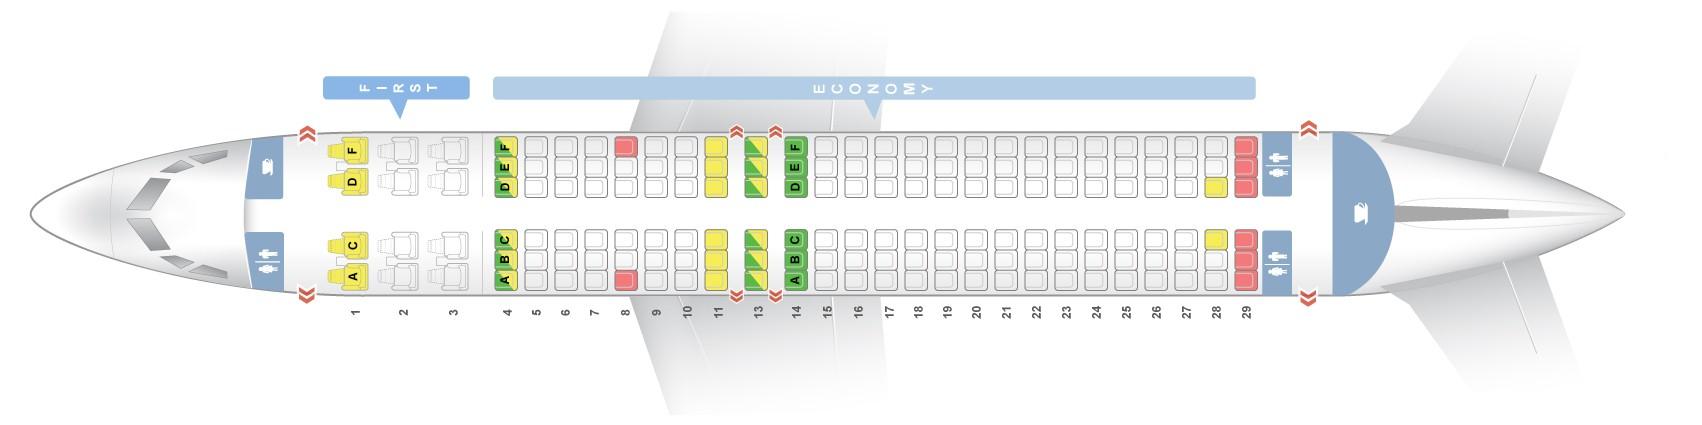 Sun Country 738 Seating Chart